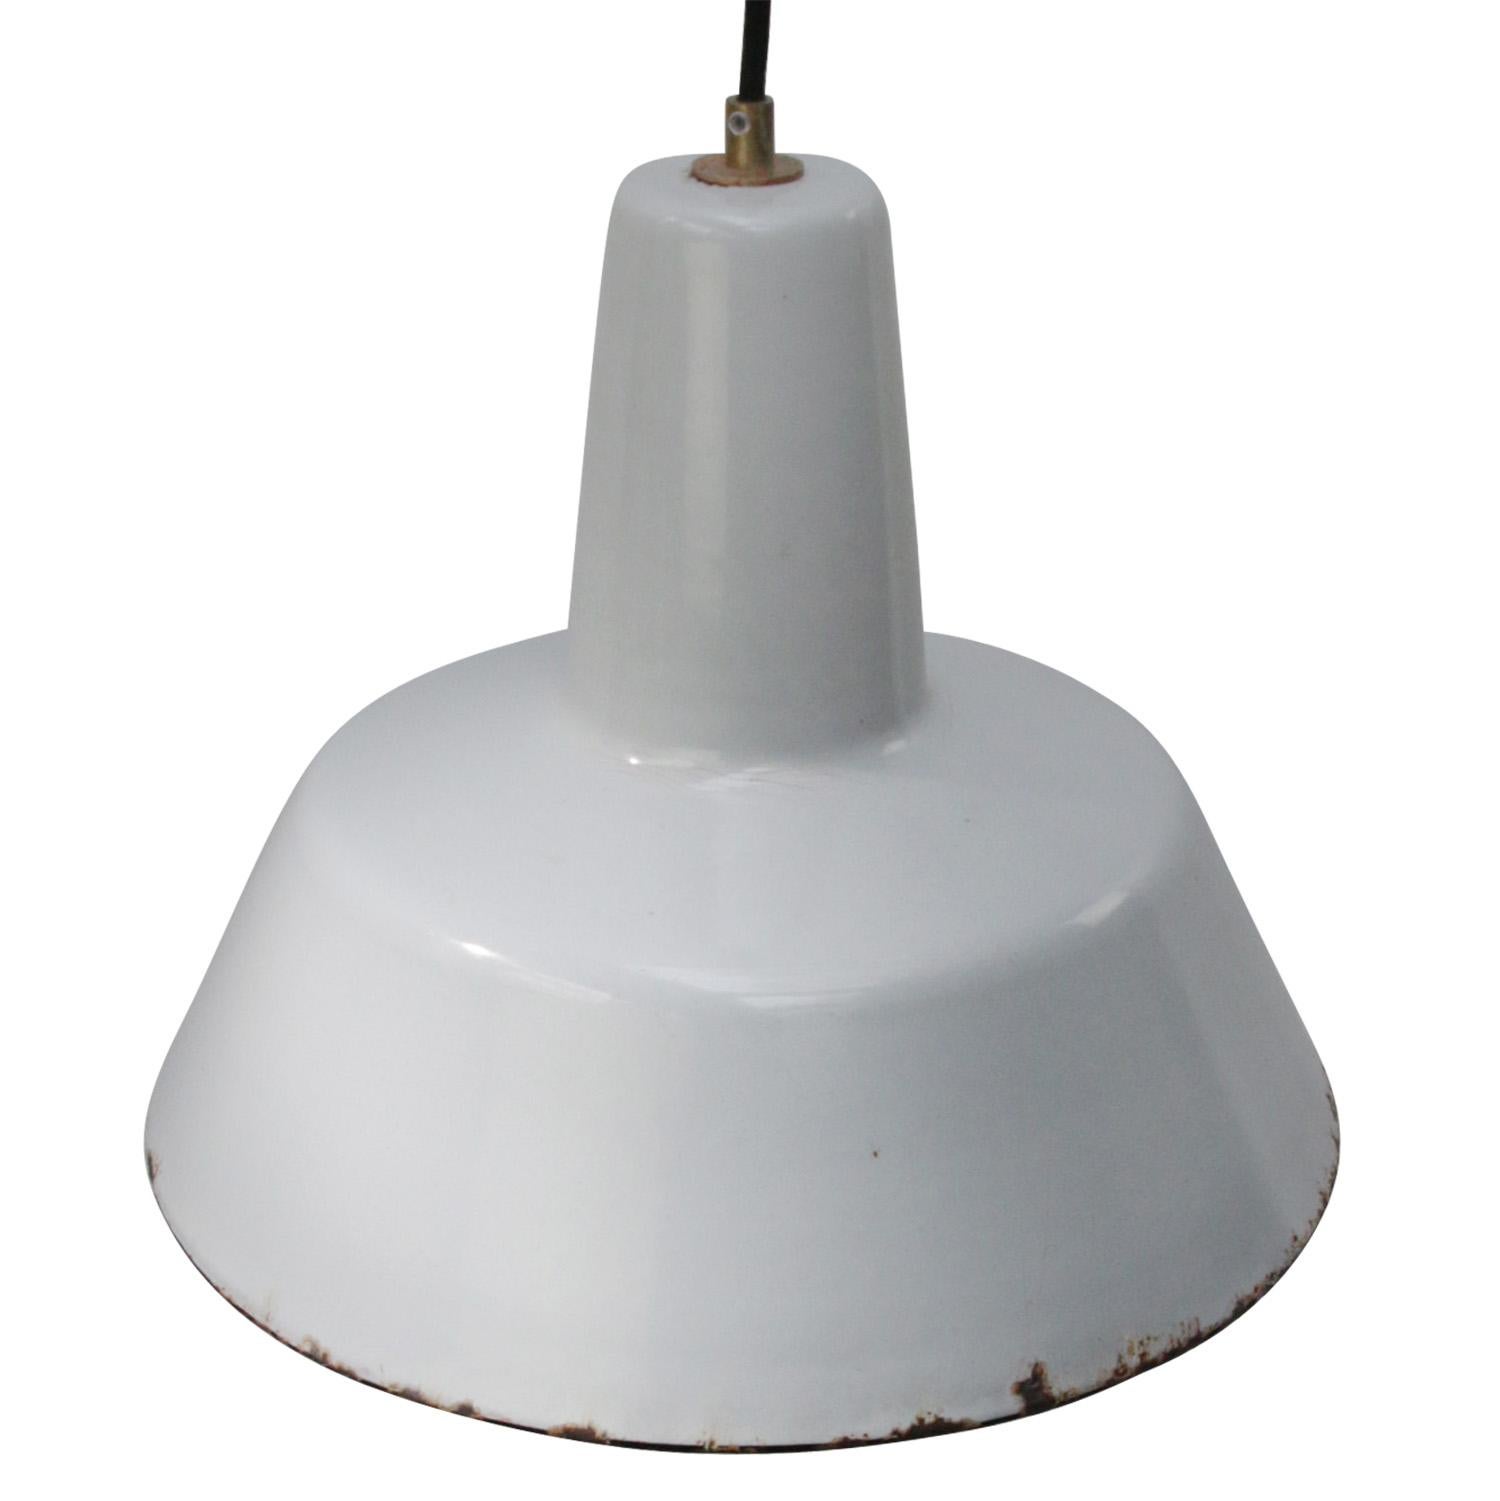 Industrial hanging lamp made by Philips, Holland
Gray enamel white interior

Weight: 1.50 kg / 3.3 lb

Priced per individual item. All lamps have been made suitable by international standards for incandescent light bulbs, energy-efficient and